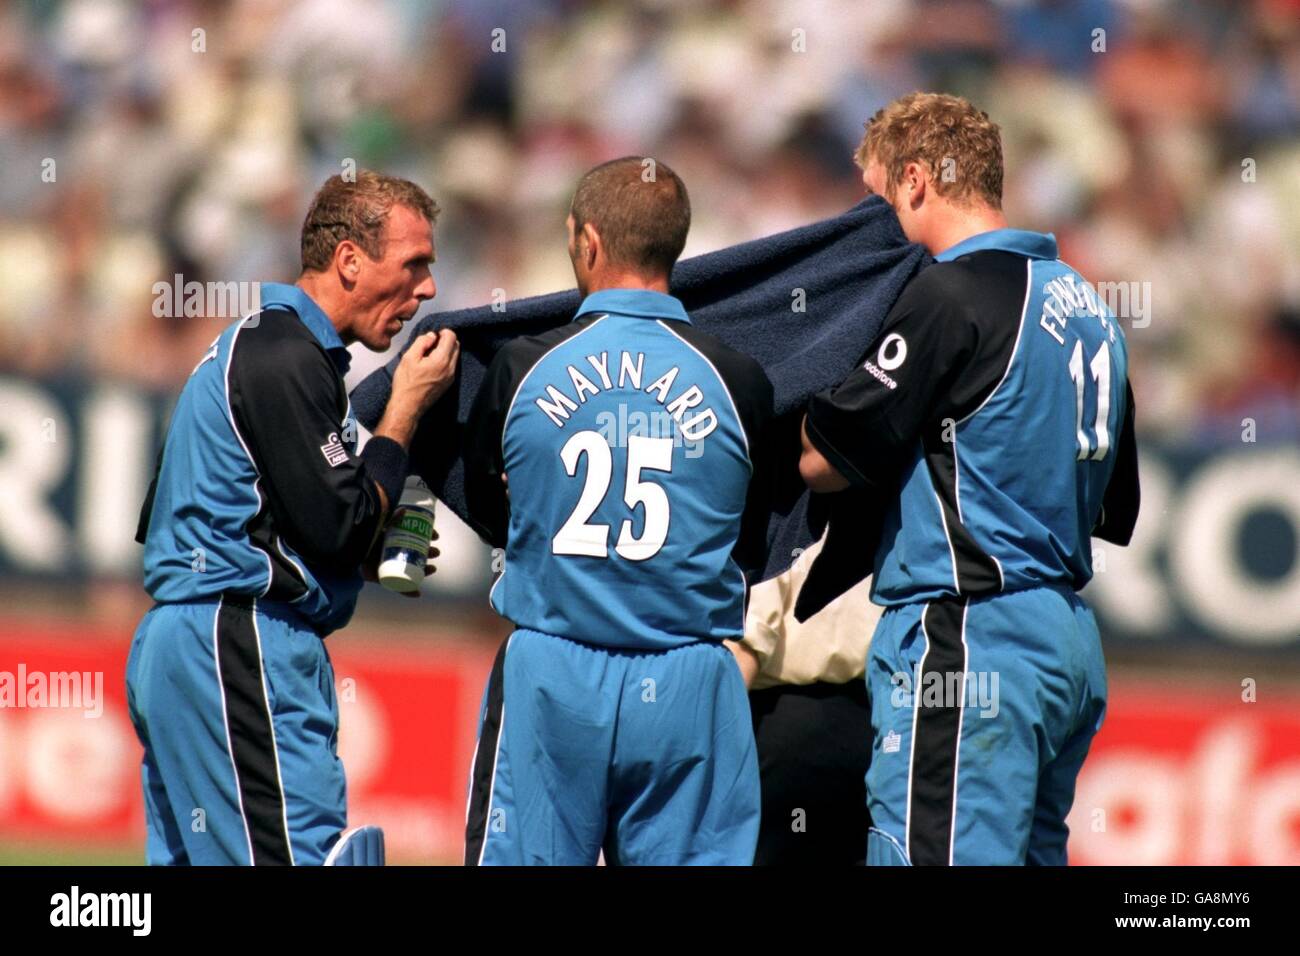 (L-R) England's Alec Stewart, Matthew Maynard and Andrew Flintoff wipe themselves down during the match Stock Photo